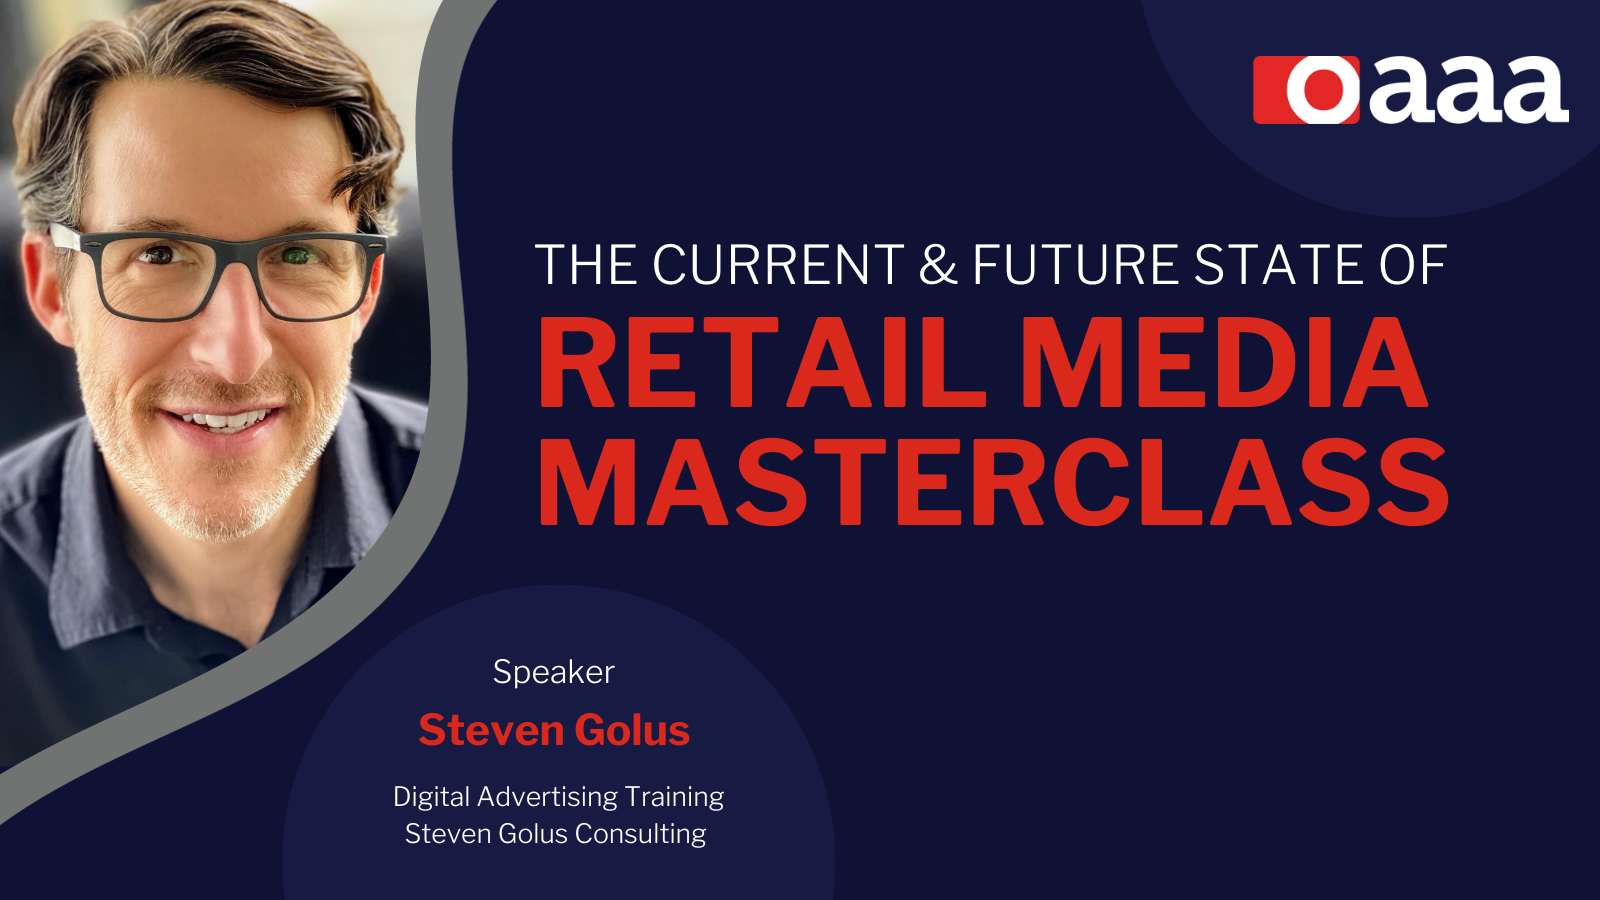 The Current & Future State of Retail Media Masterclass